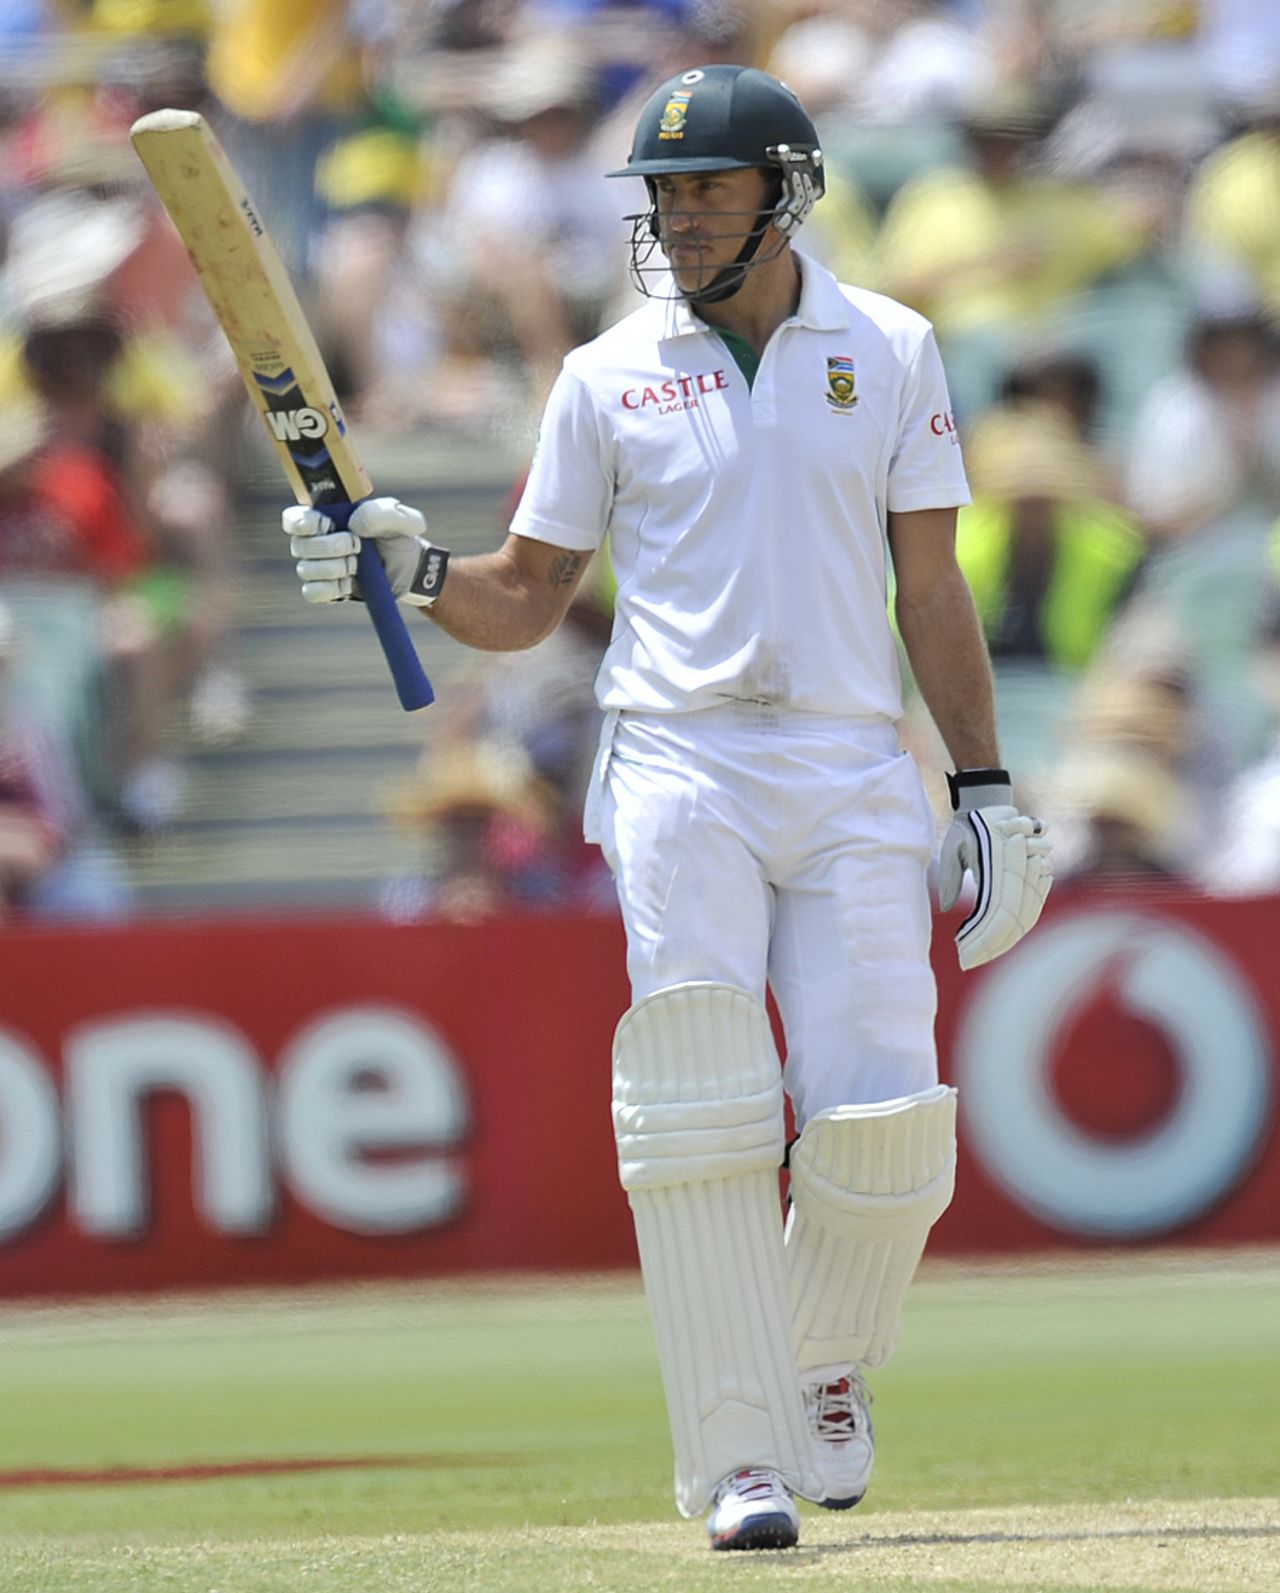 Faf du Plessis raises his bat after reaching a half-century, Australia v South Africa, 2nd Test, Adelaide, 3rd day, November 24, 2012